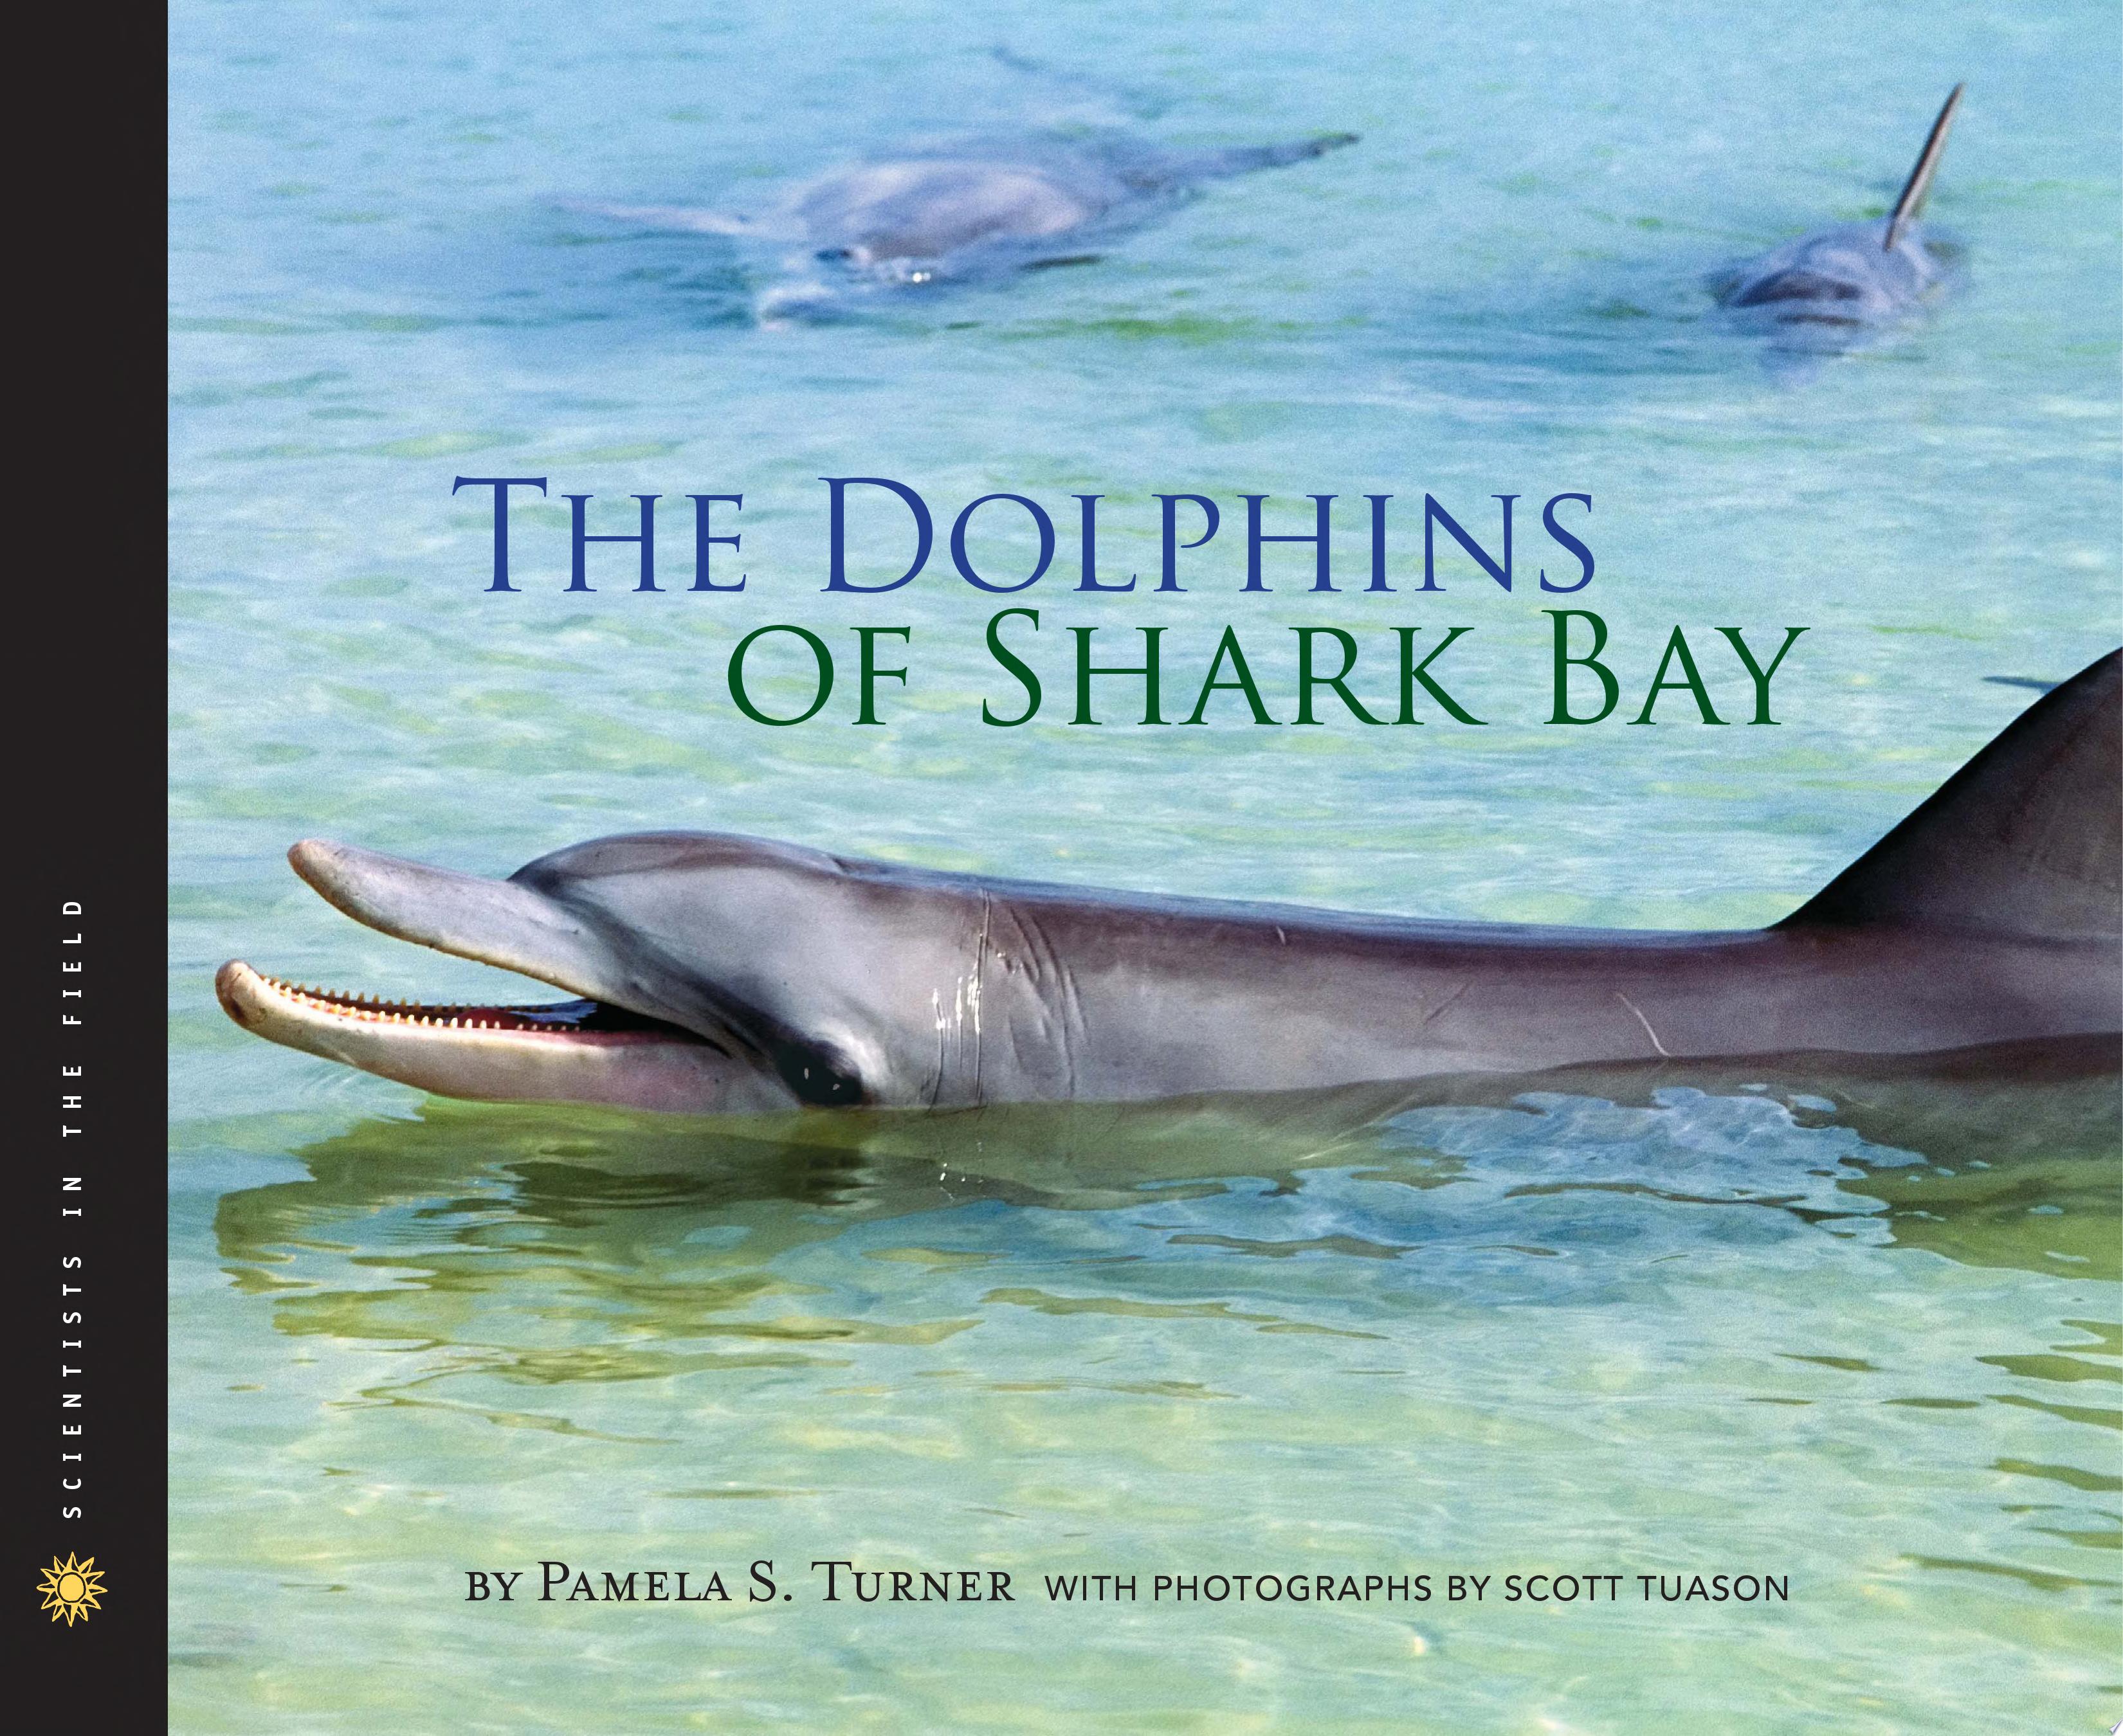 Image for "The Dolphins of Shark Bay"